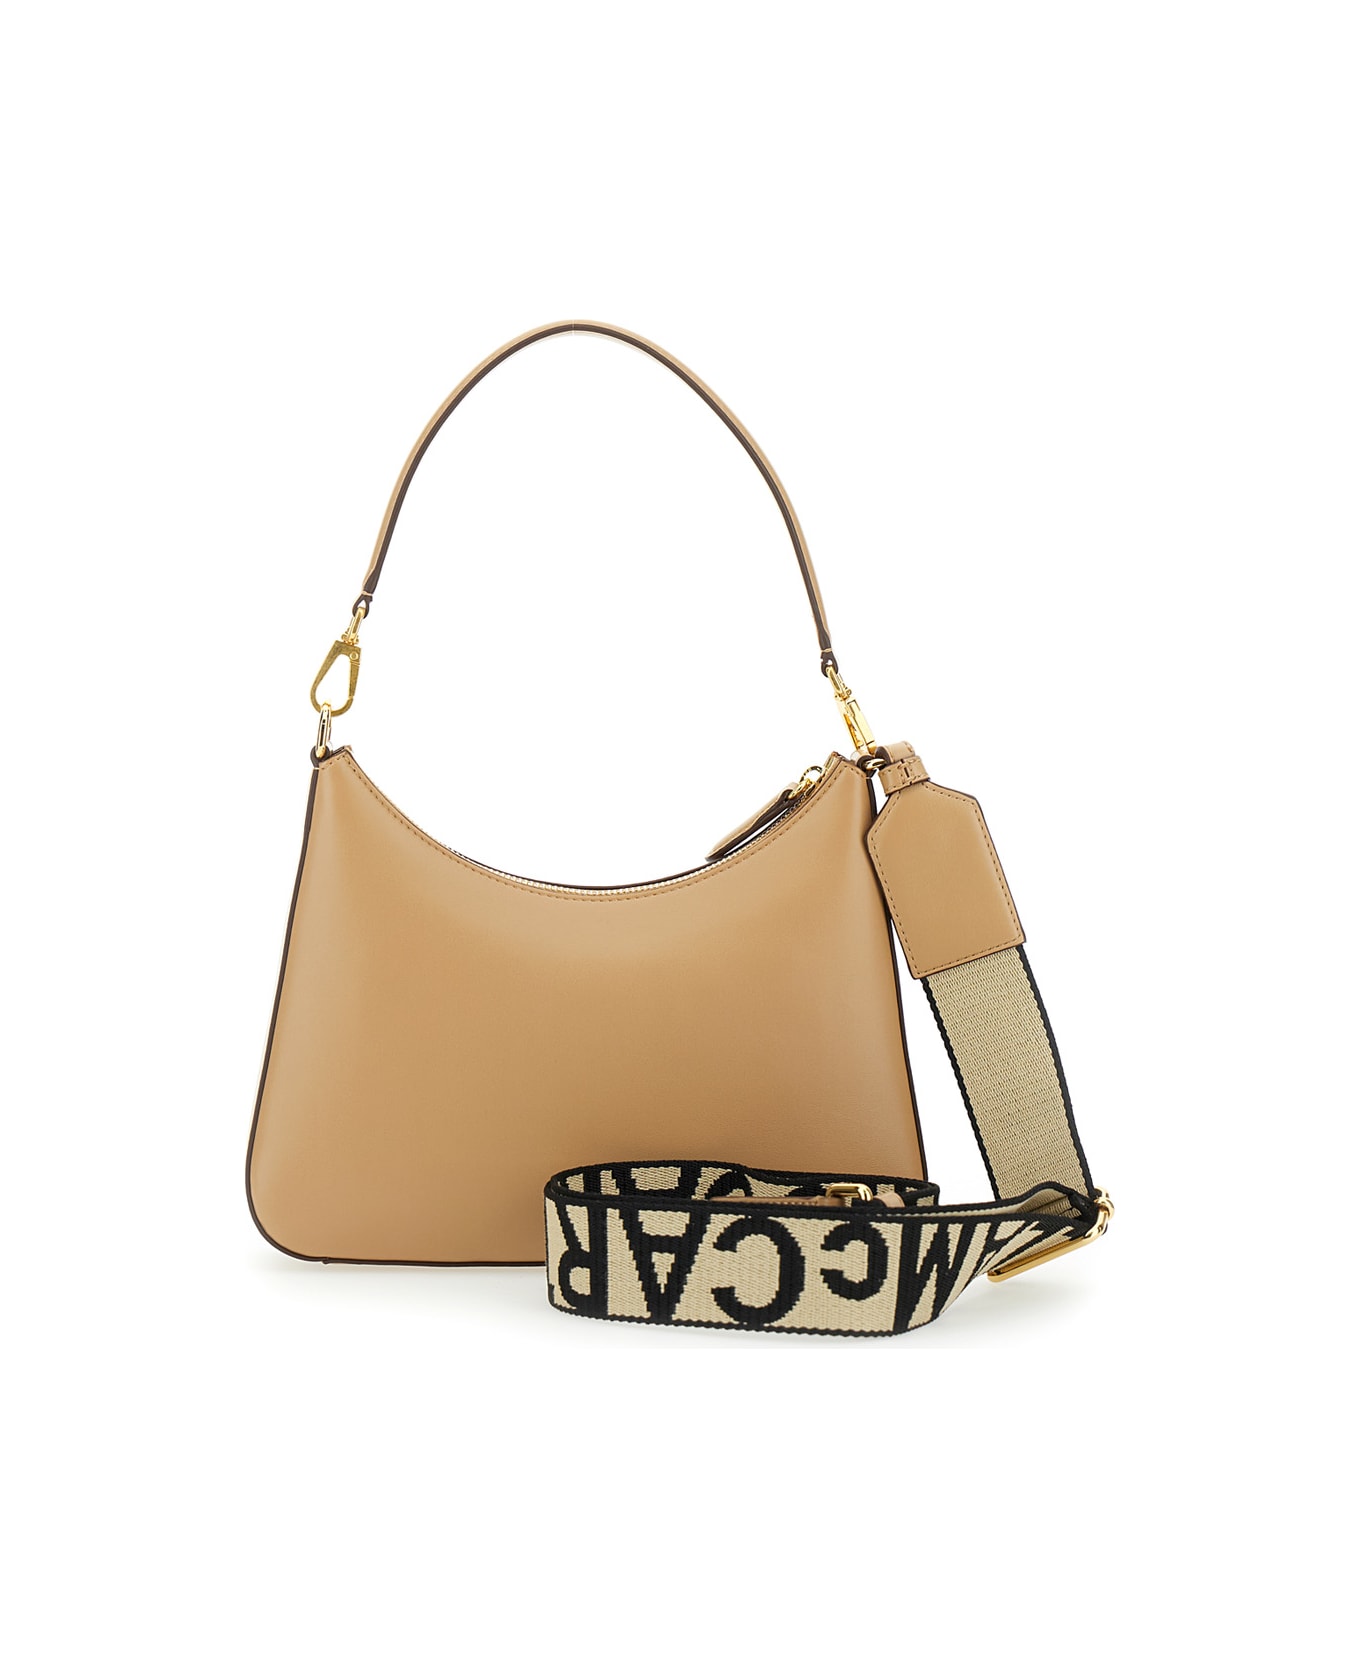 Stella McCartney Beige Shoulder Bag With Perforated Logo In Eco Leather Woman - Beige